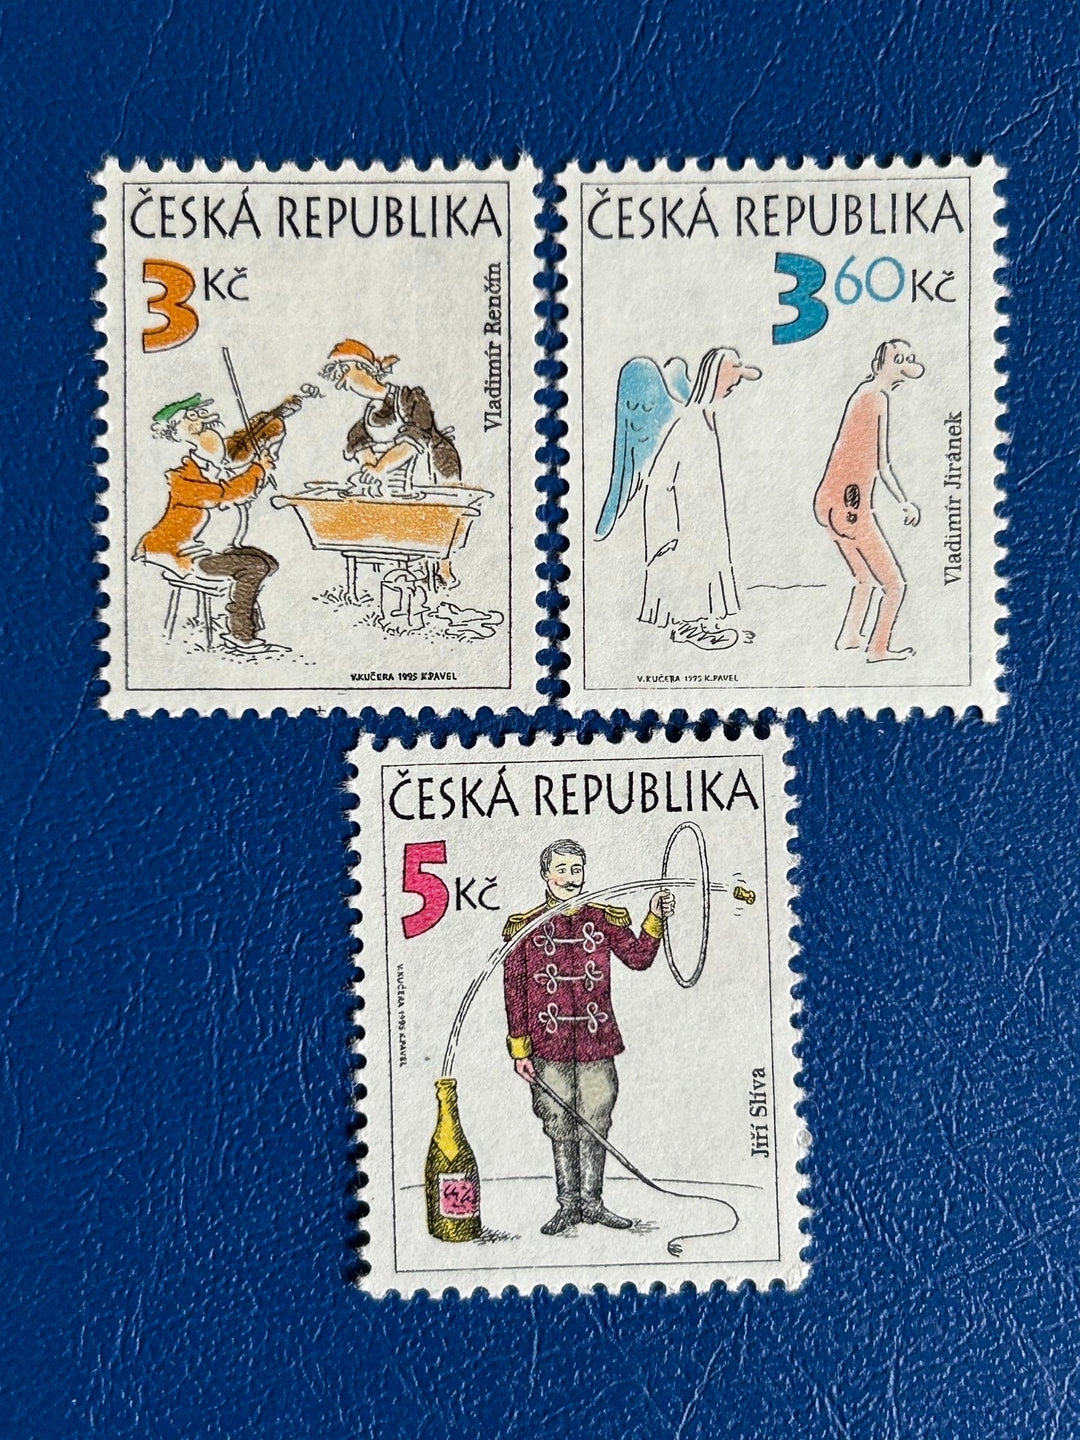 Czechoslovakia - Original Vintage Postage Stamps - 1995 - Czechoslovakian Cartoons - for the collector, artist or crafter